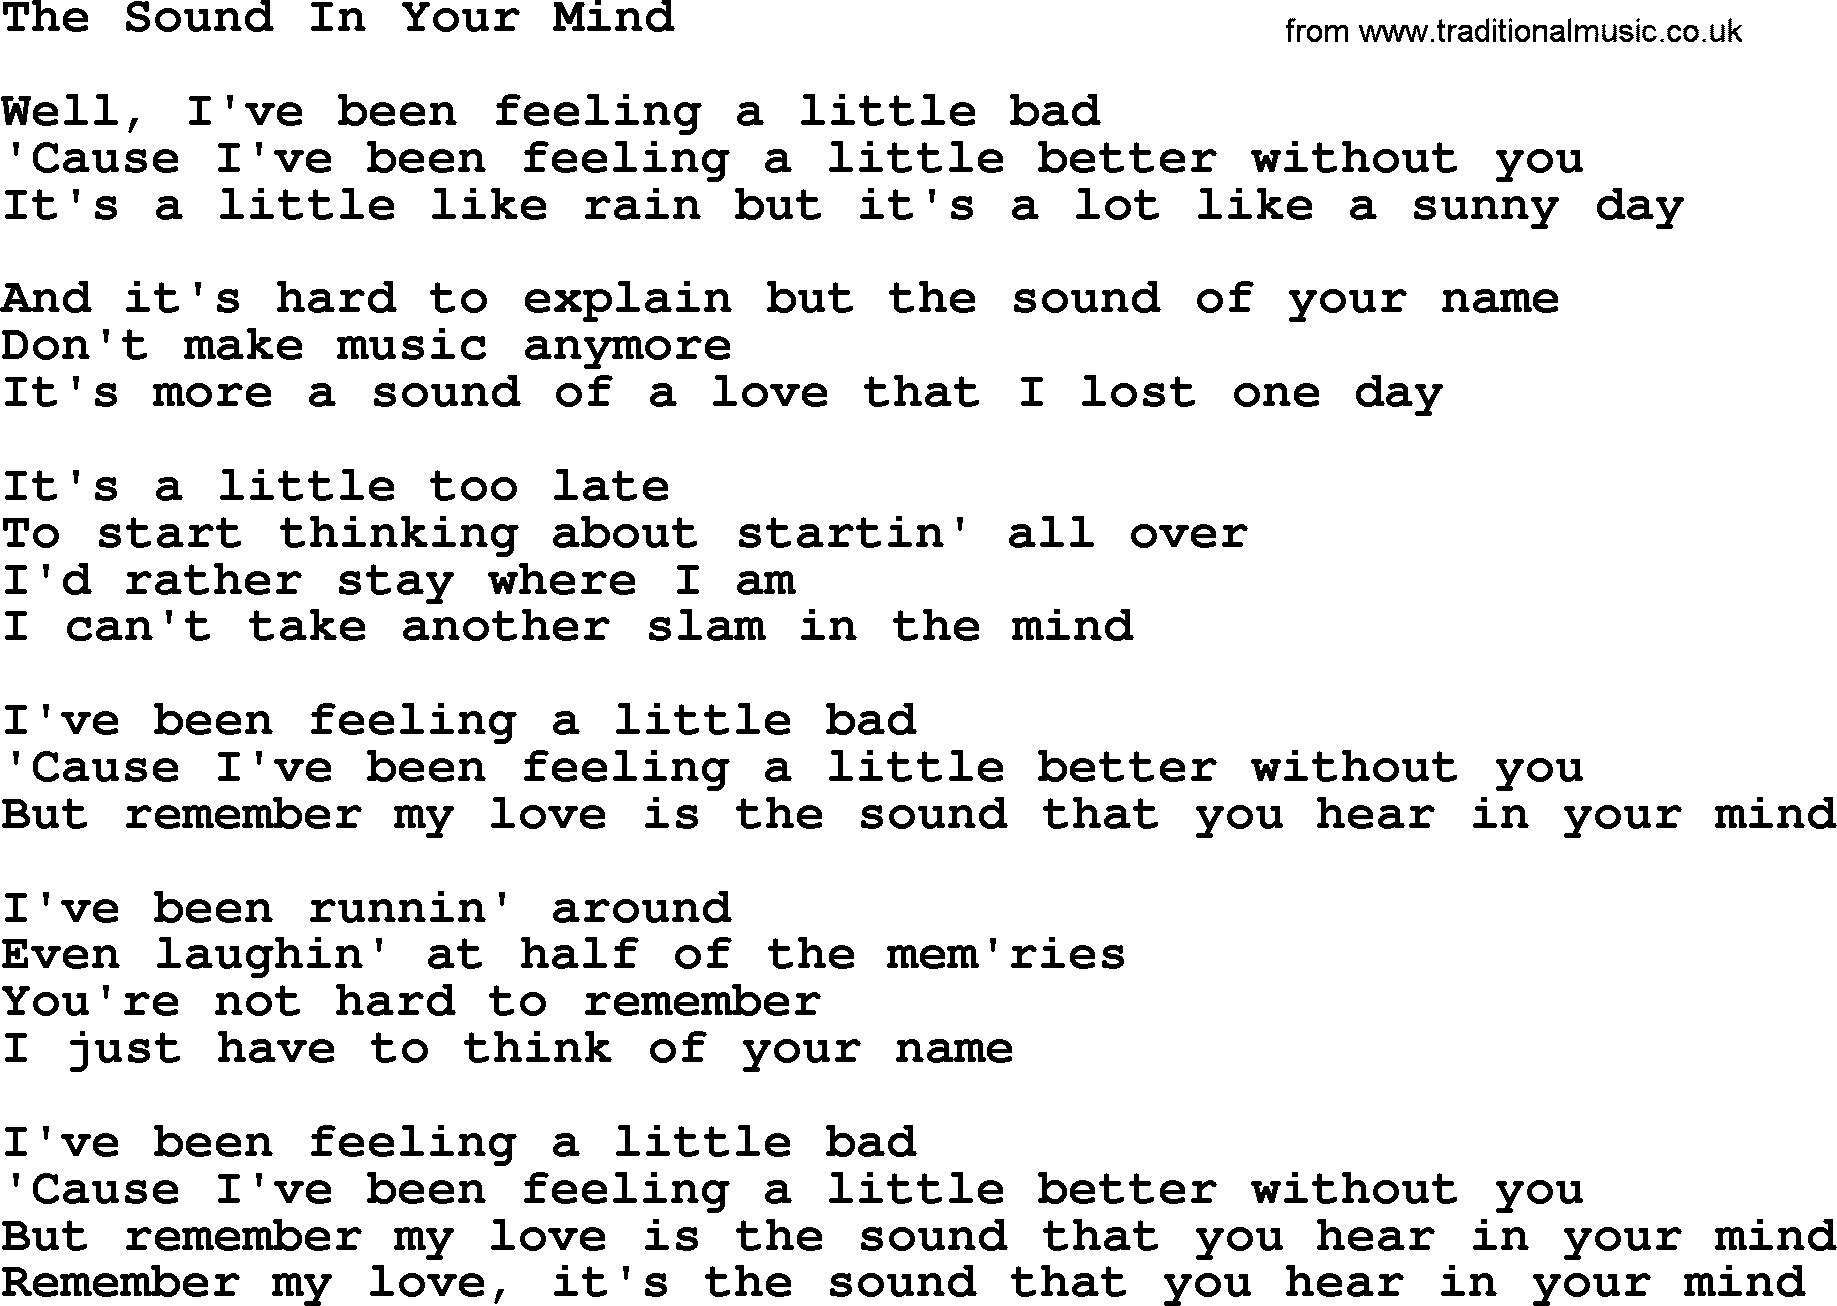 Willie Nelson song: The Sound In Your Mind lyrics